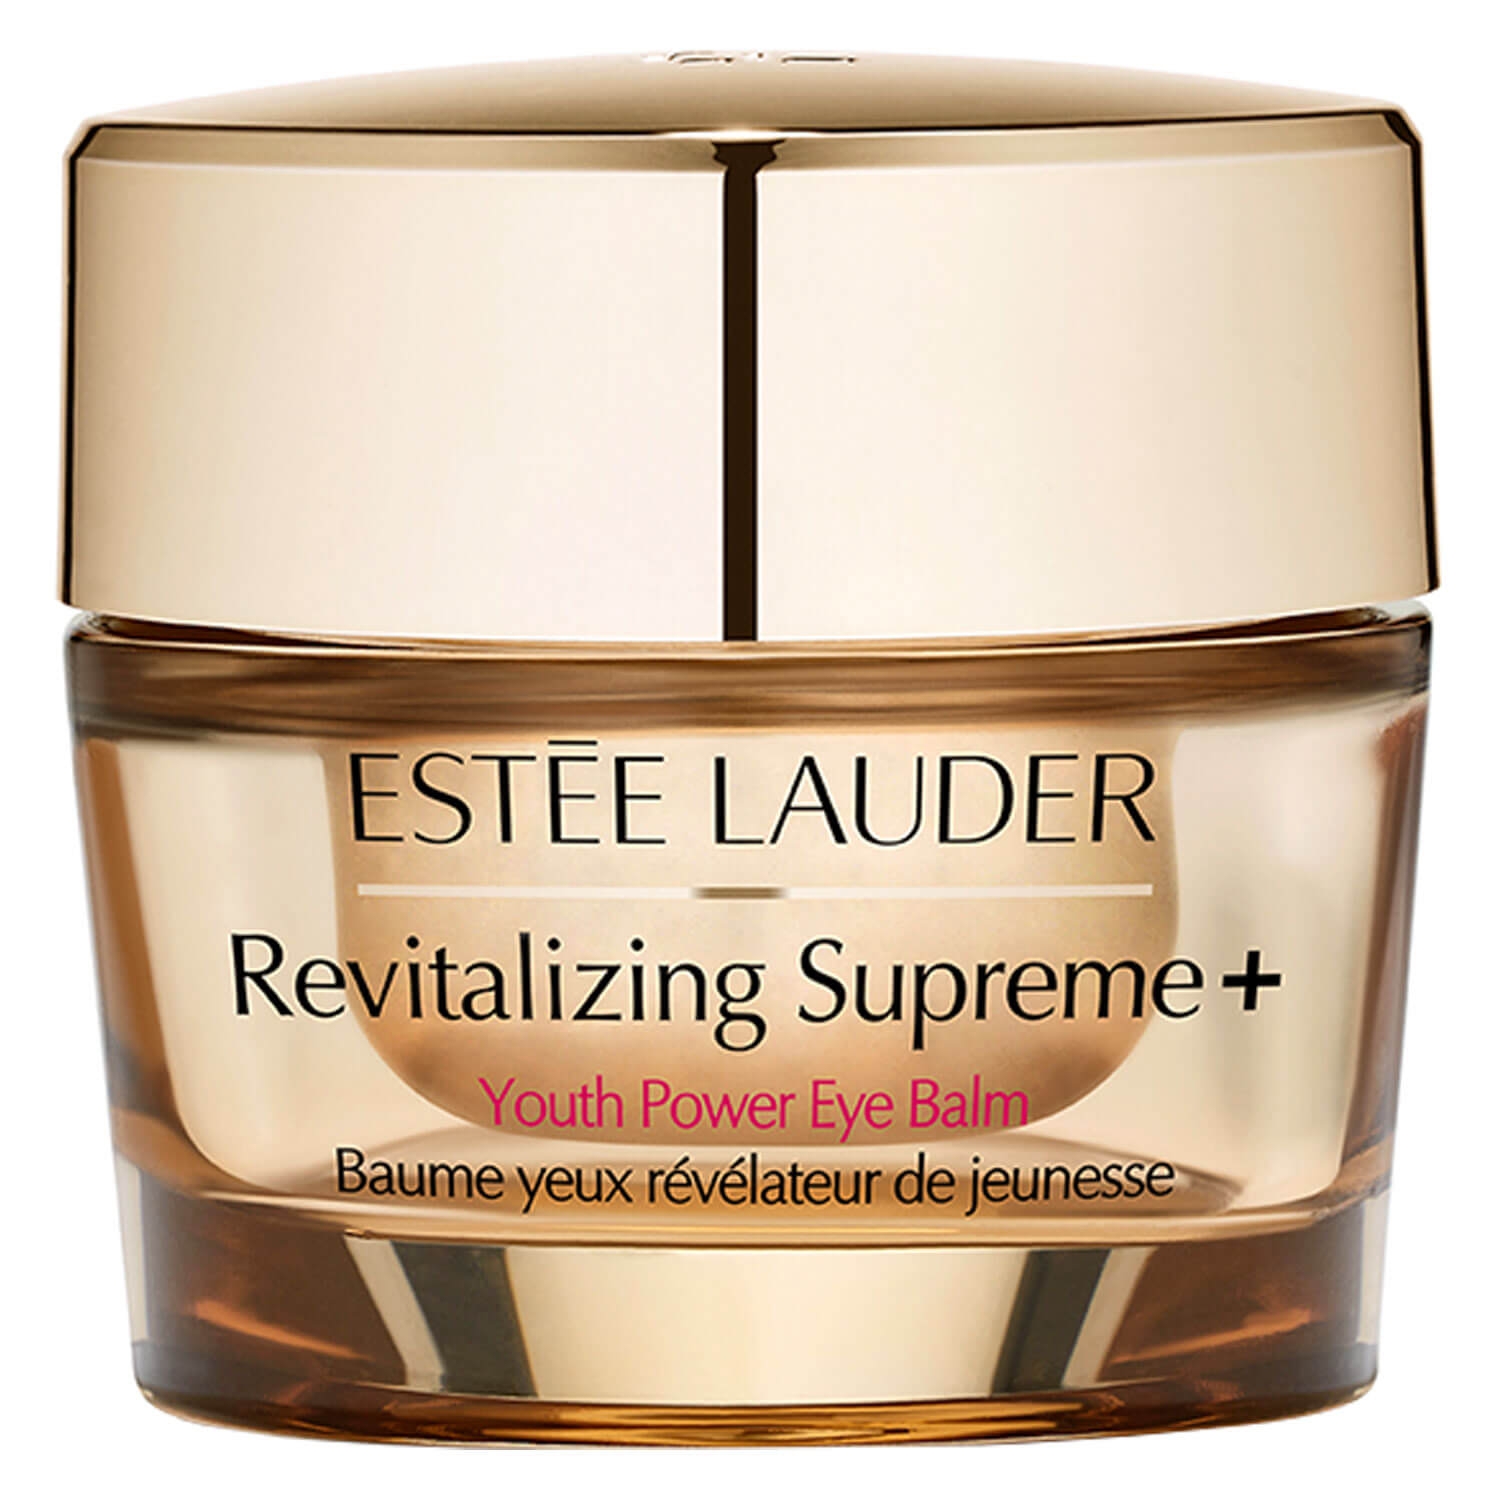 Product image from Revitalizing Supreme+ - Youth Power Eye Balm